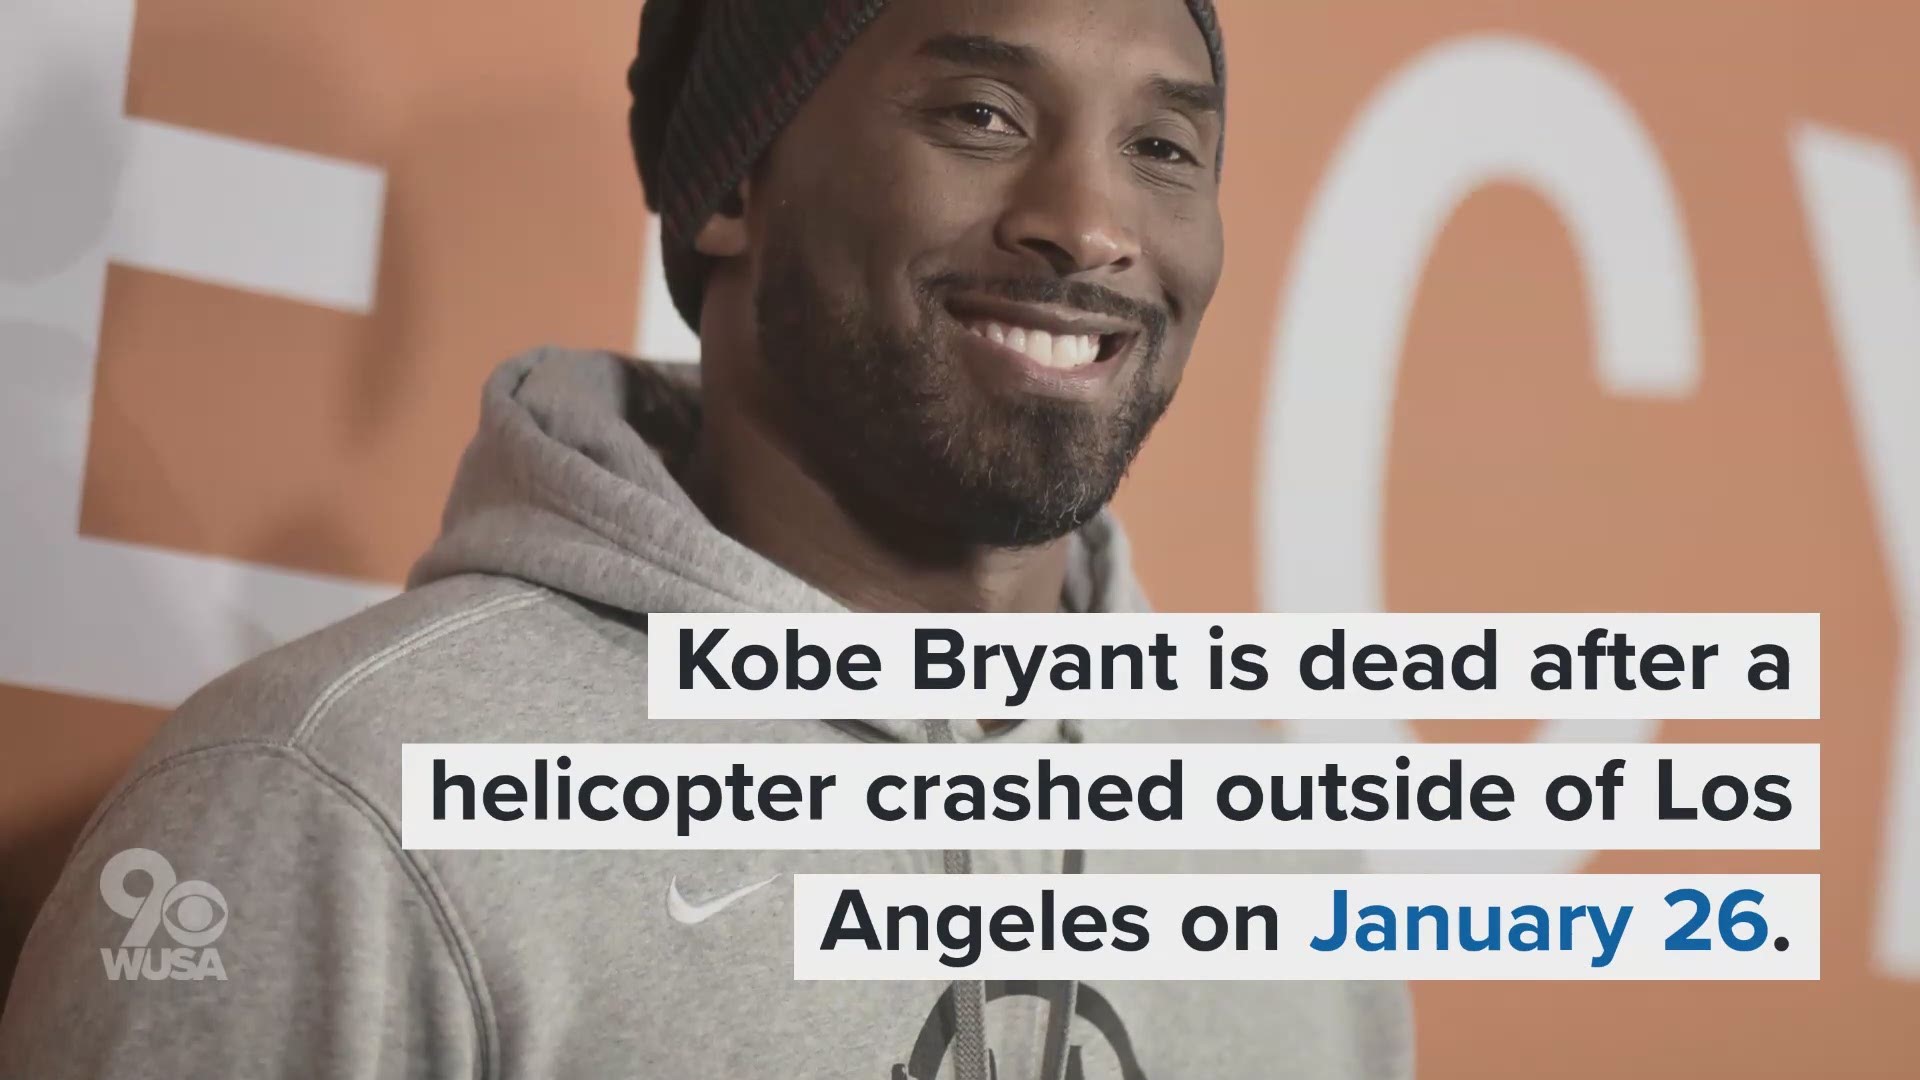 Bryant was 41. The helicopter crash killed all five on board.